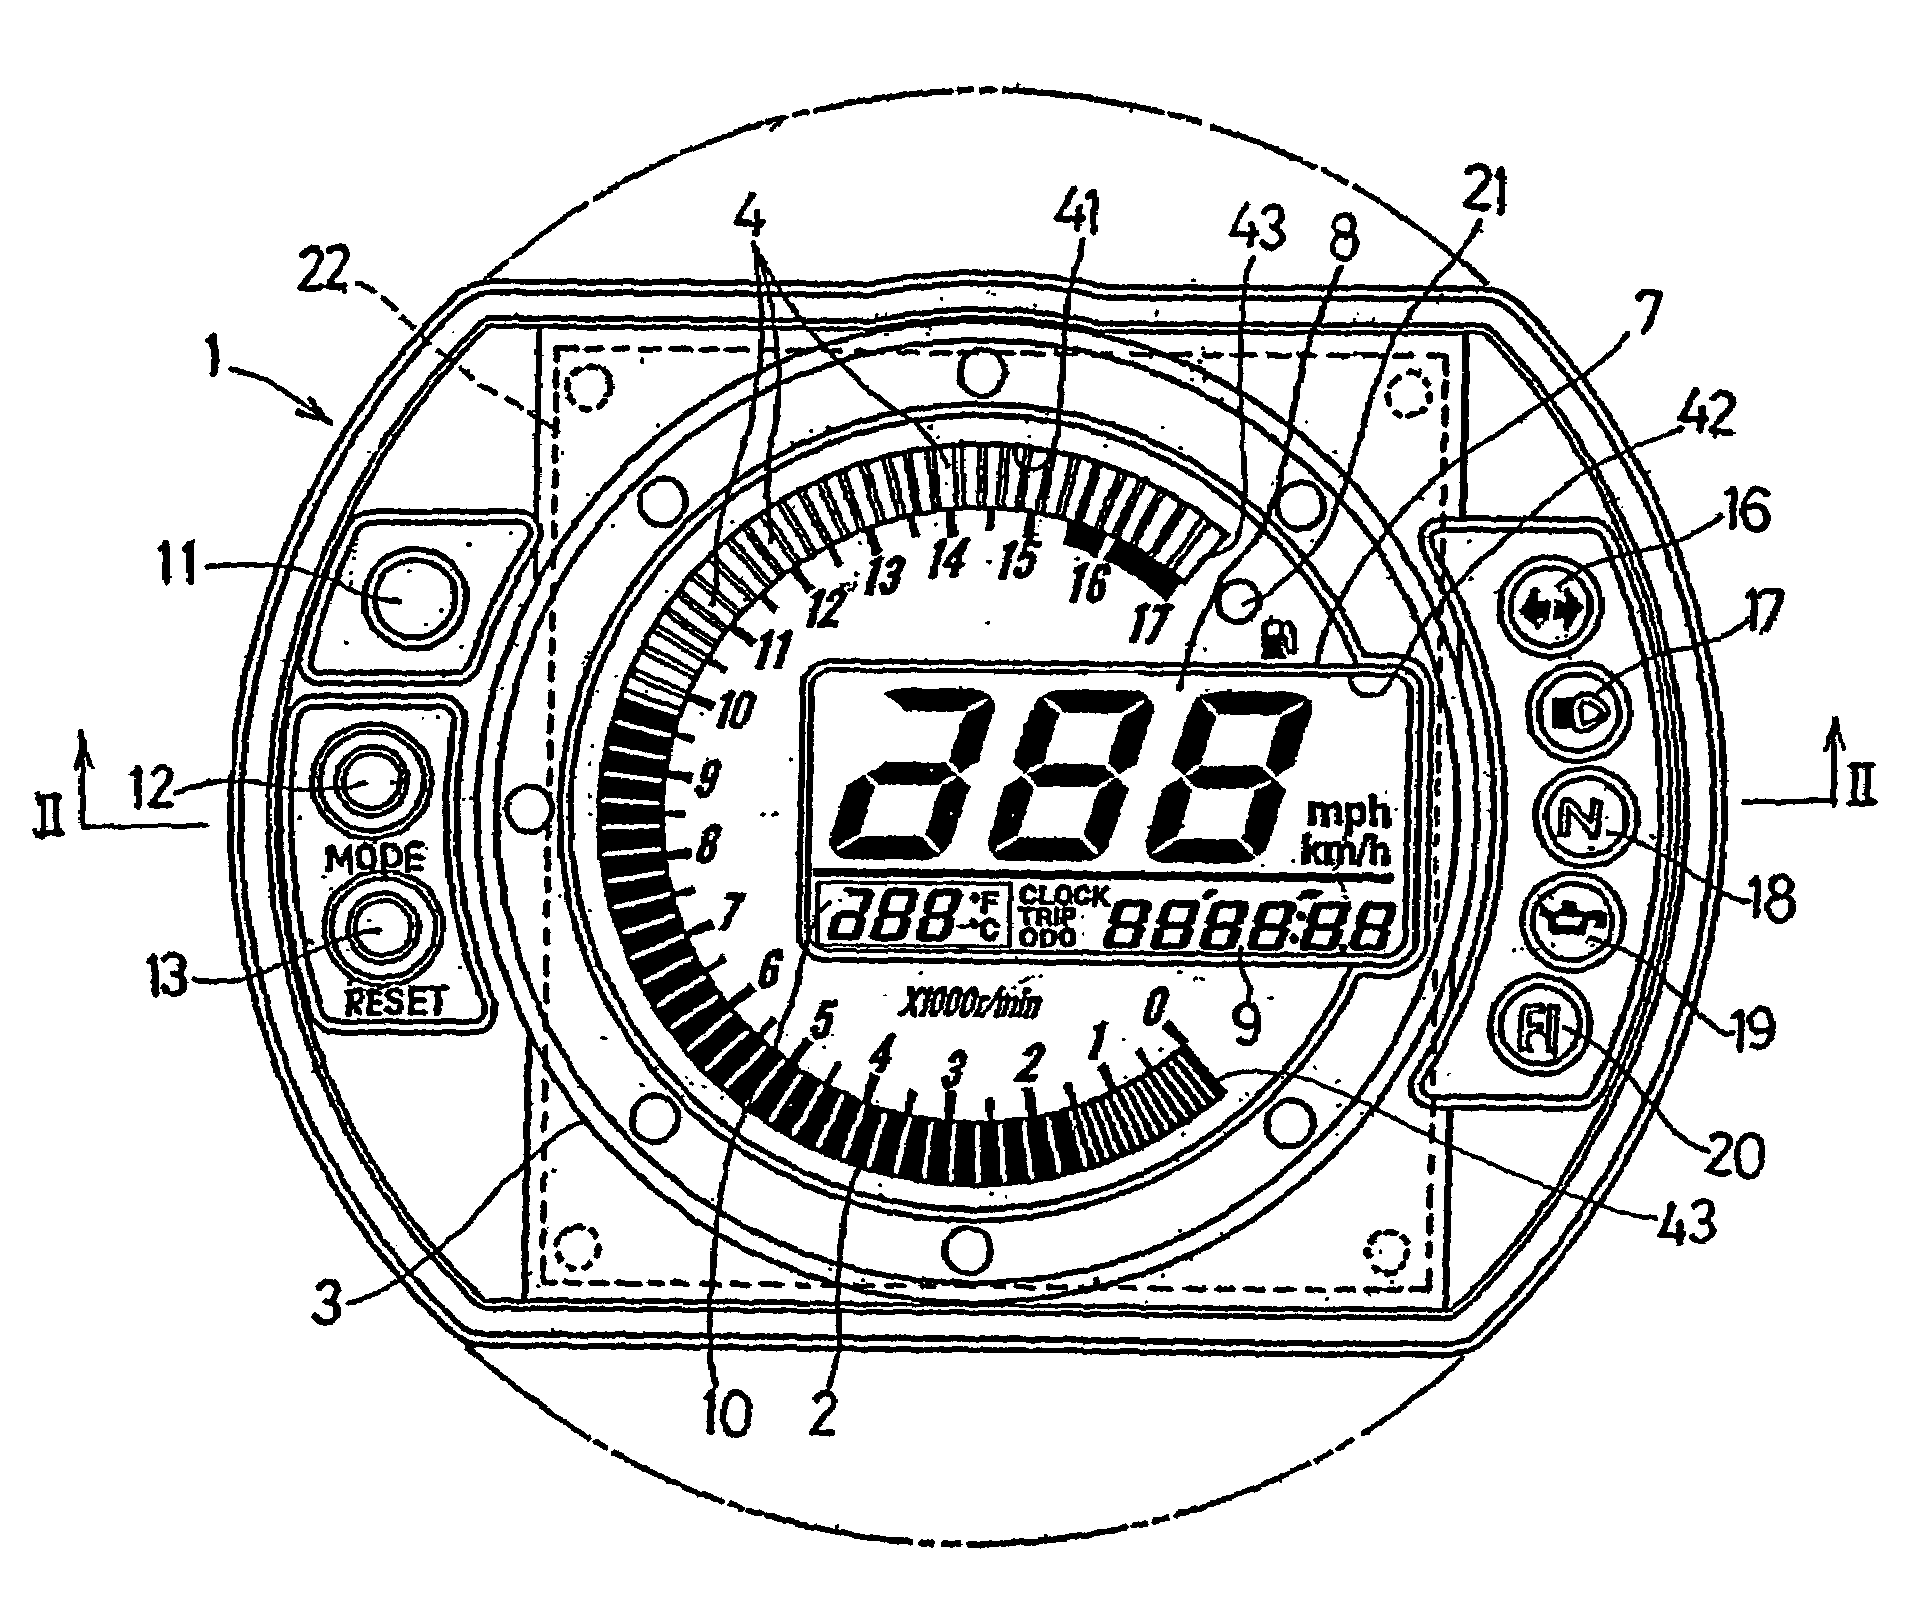 Combination indicator assembly in vehicle instrument panel